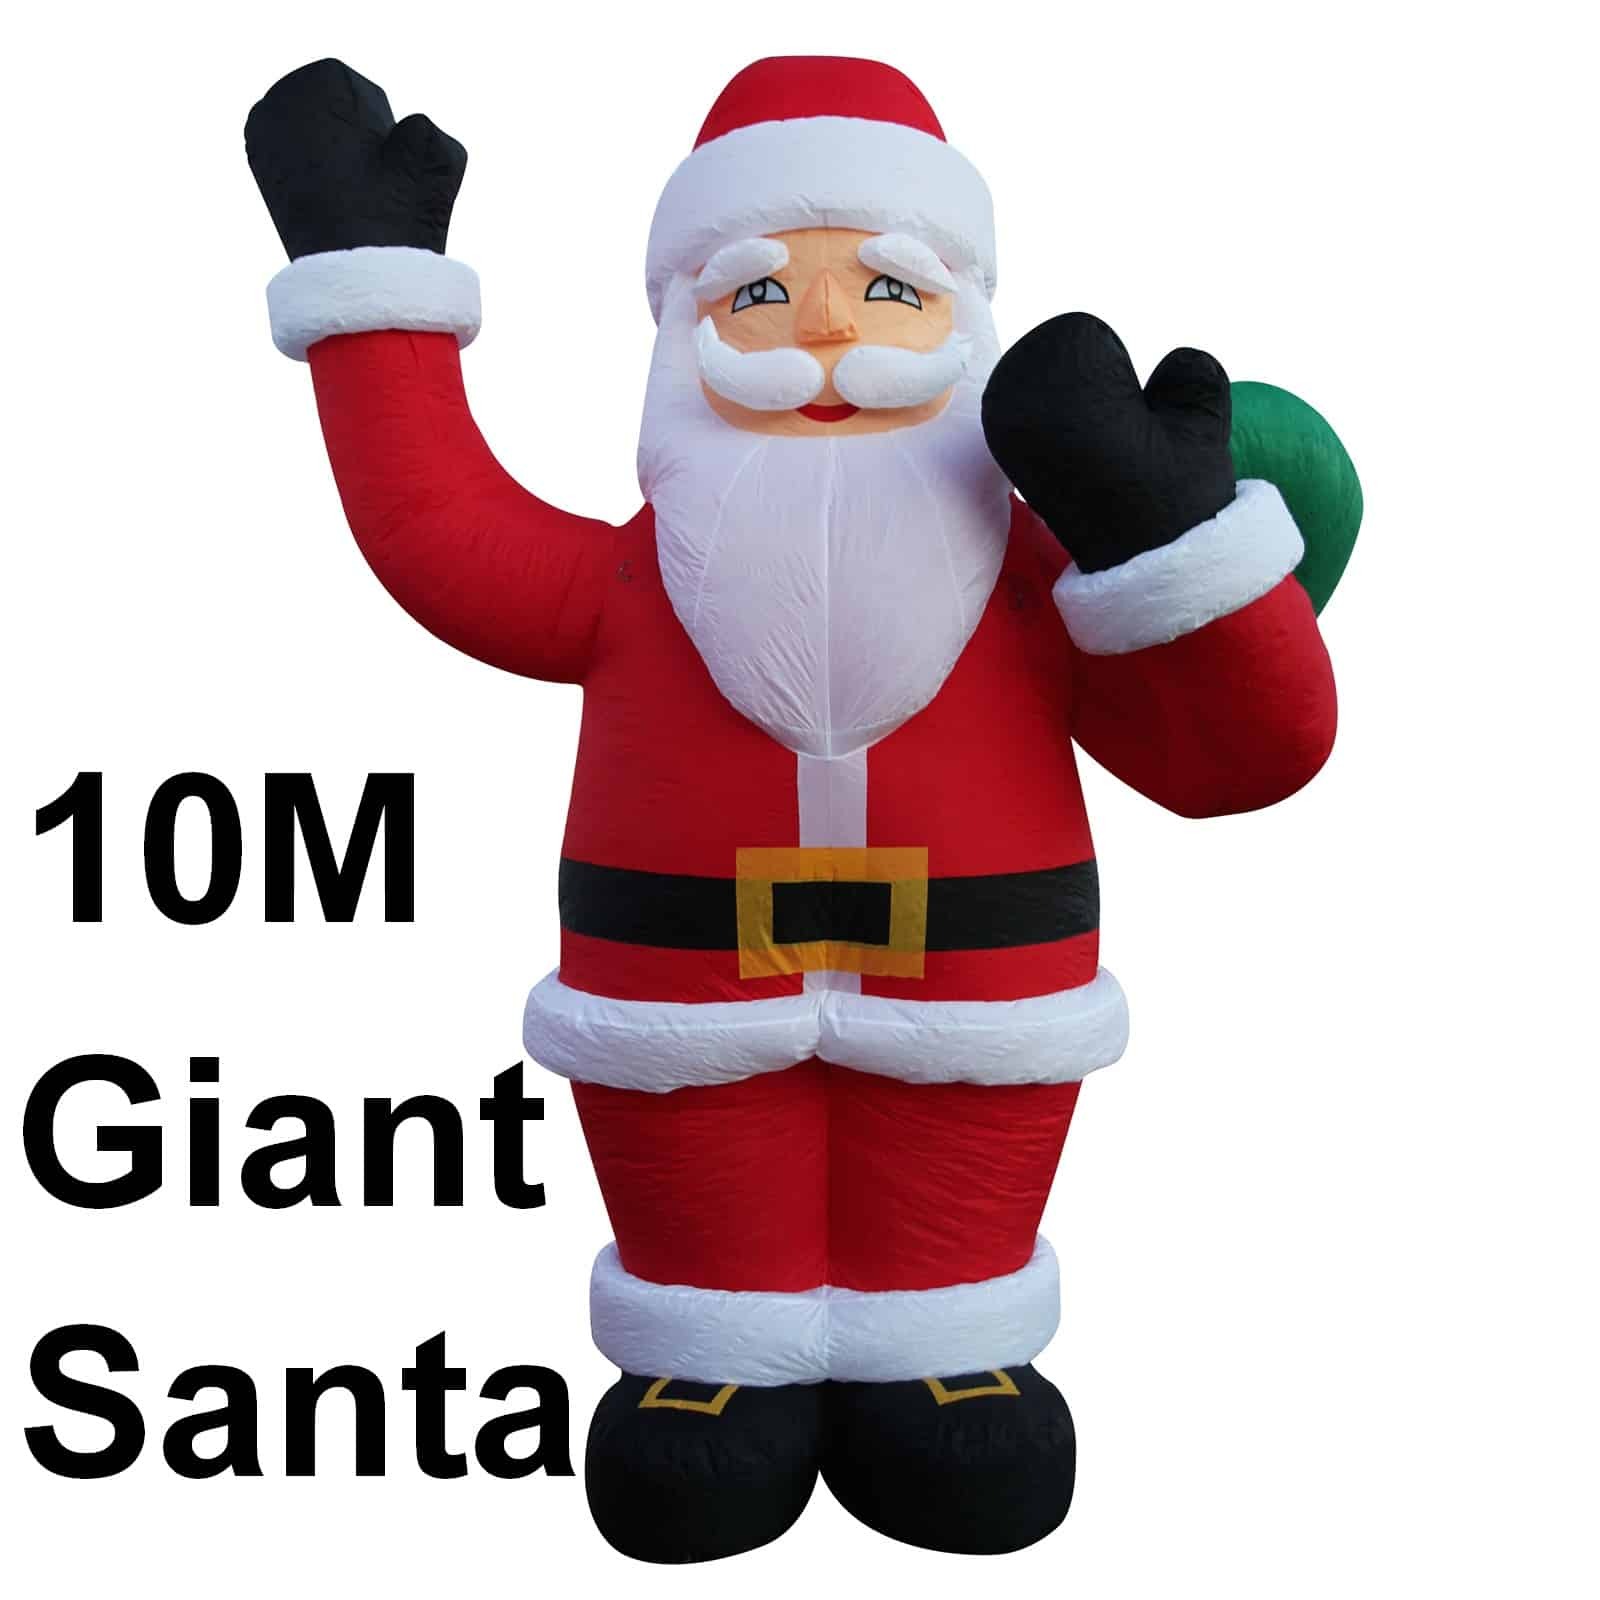 10M Giant Christmas Santa Claus Inflatable Outdoor